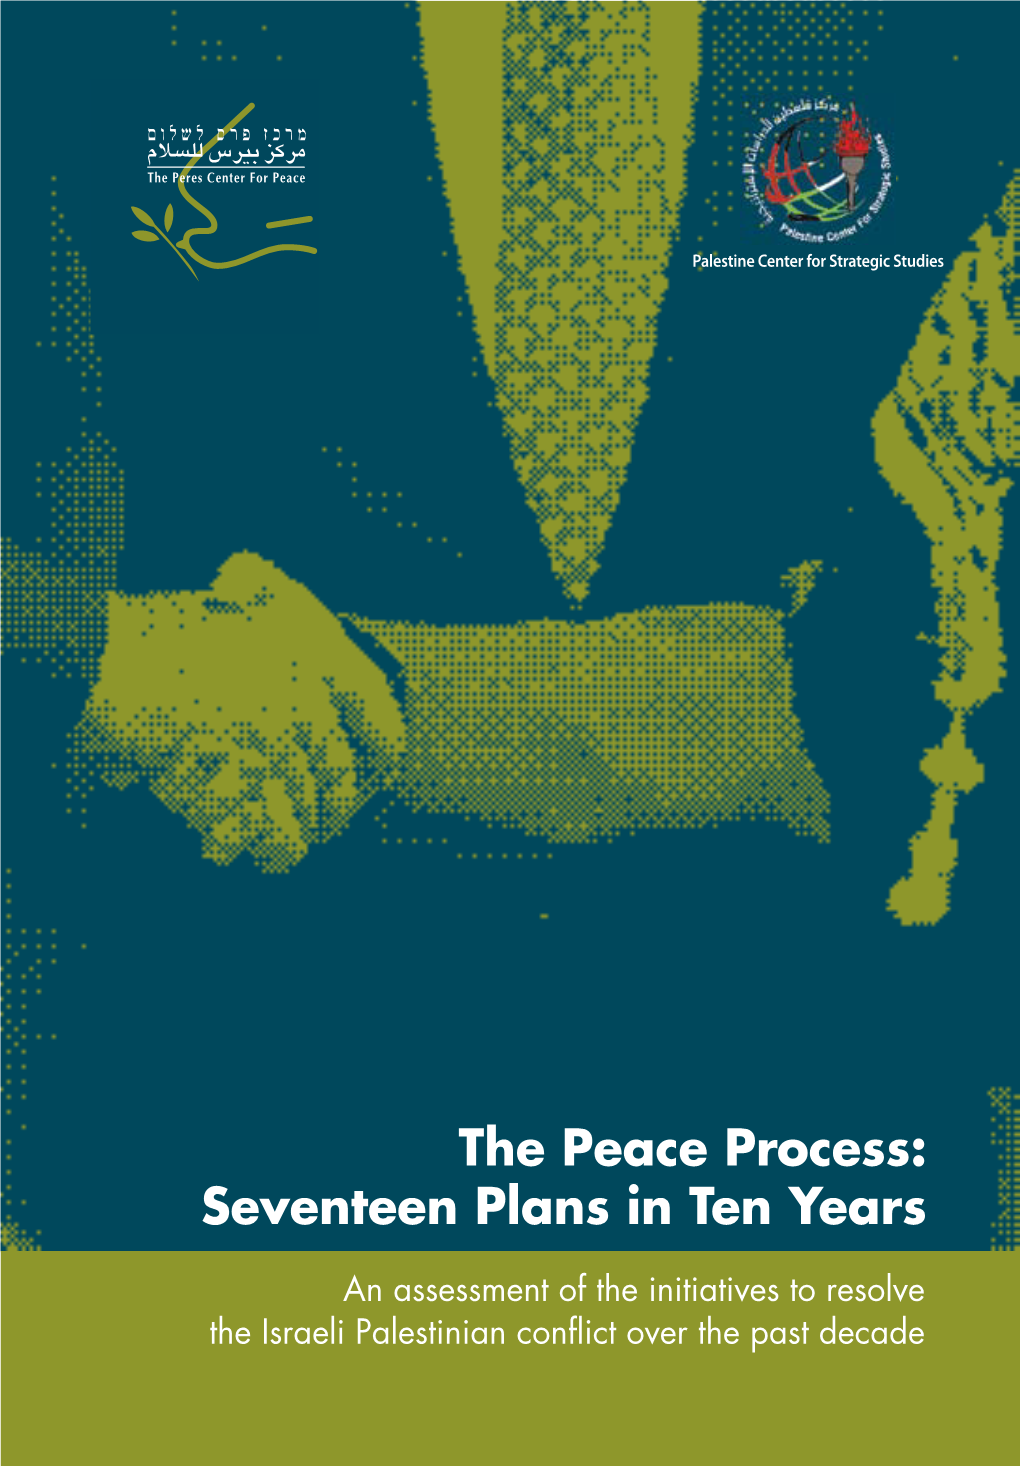 The Peace Process: Seventeen Plans in Ten Years